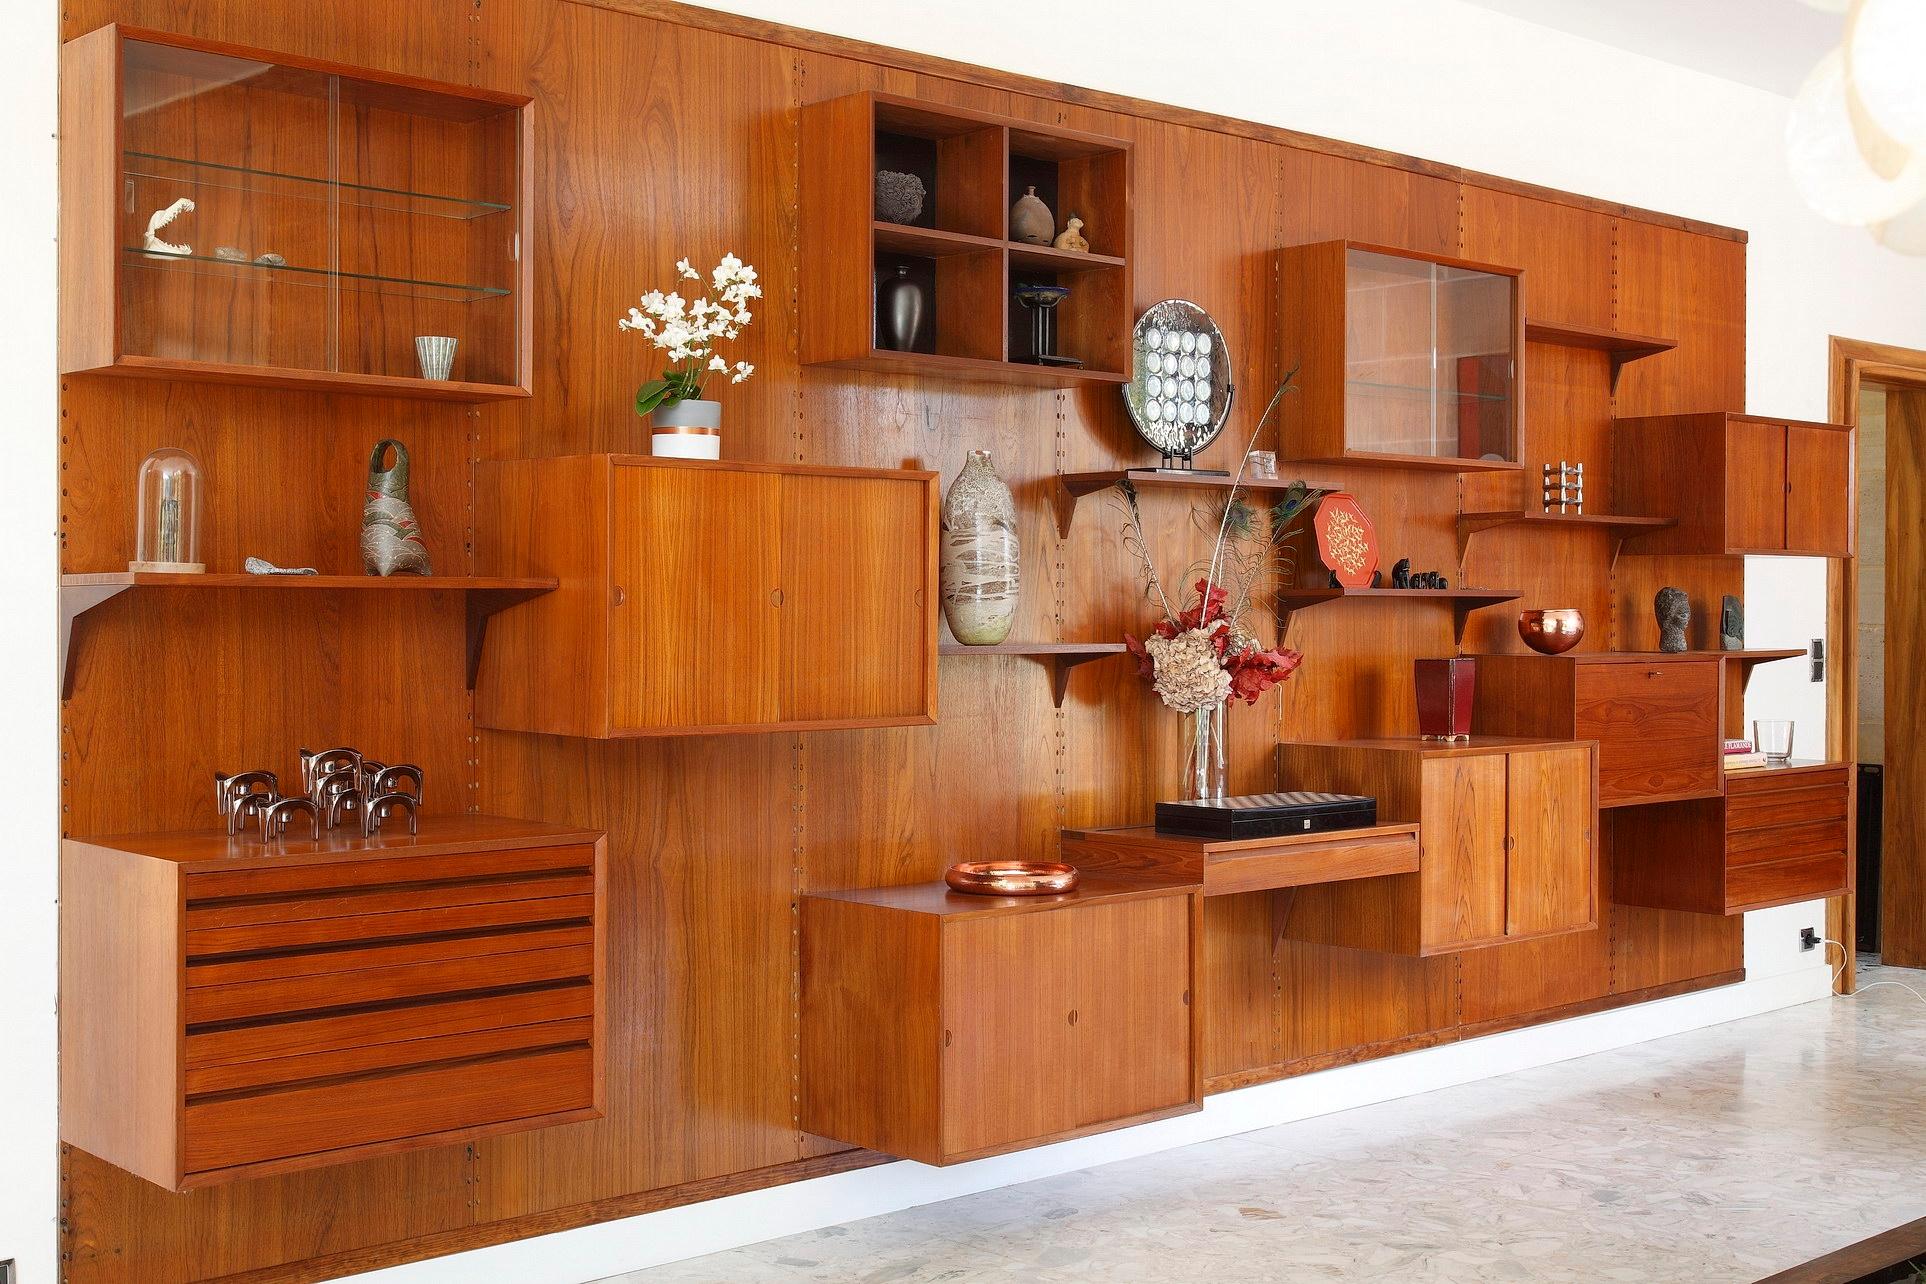 Poul Cadovius wall unit crafted of teak in the 1960s. This modular scandinavian shelving system consists of seven vertical panels with shelves and cabinet units:

- 7 shelves (P 22cm)
- 3 cabinet units with wood sliding doors (P46cm; H51cm)
- 1